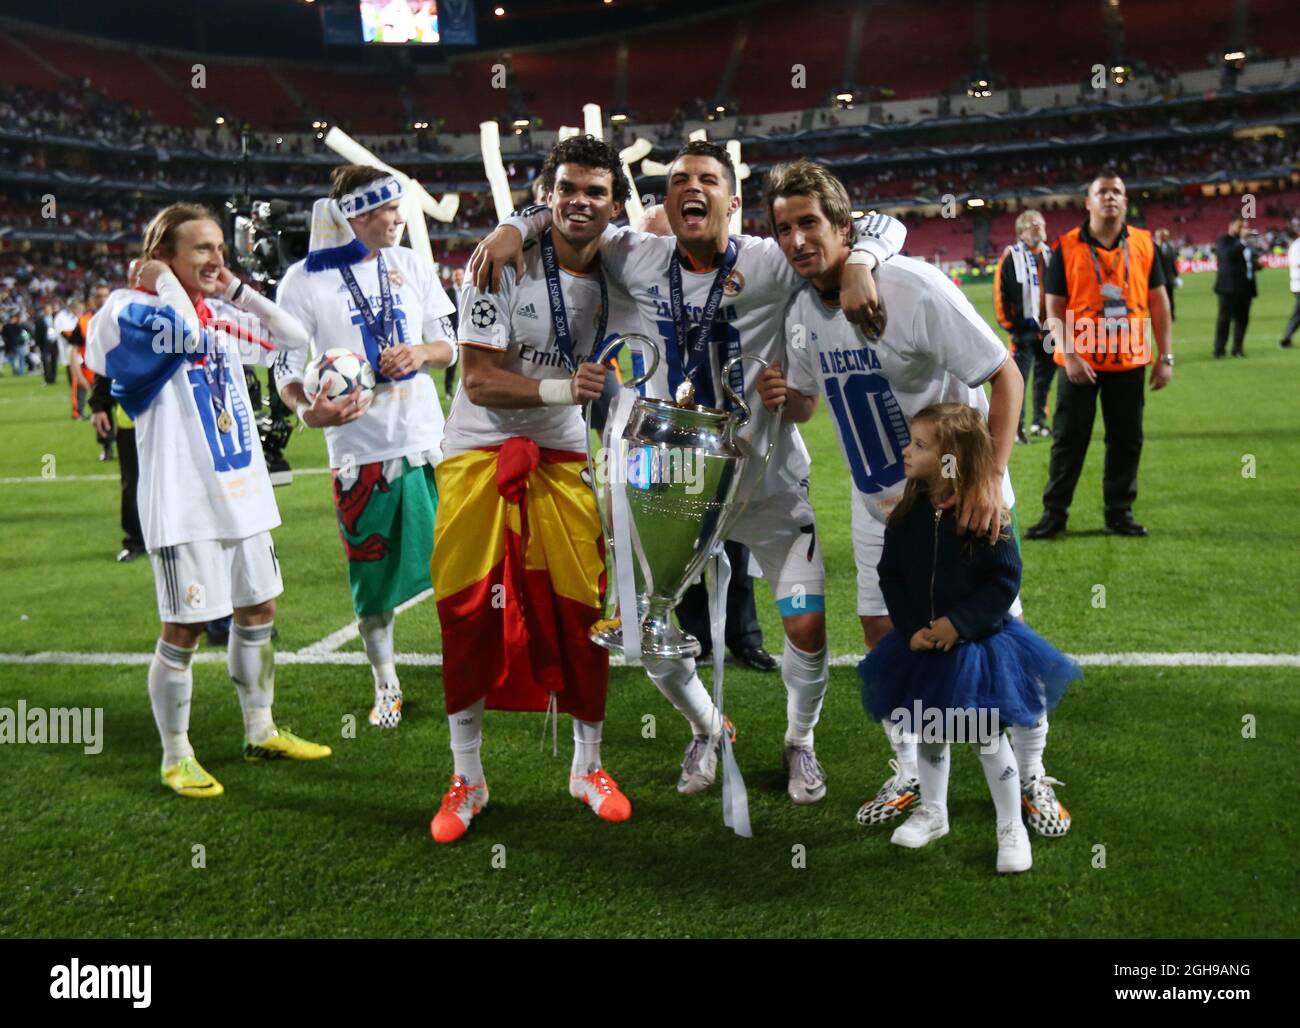 Real Madrid's Pepe, Cristiano Ronaldo and Fabio Coentrao celebrate with the trophy After the UEFA Champions League soccer final match between Real Madrid and Atletico Madrid at Estadio da Luz Stadium in Lisbon, Portugal on May 24, 2014. Pictured by David Klein/Sportimage. Stock Photo